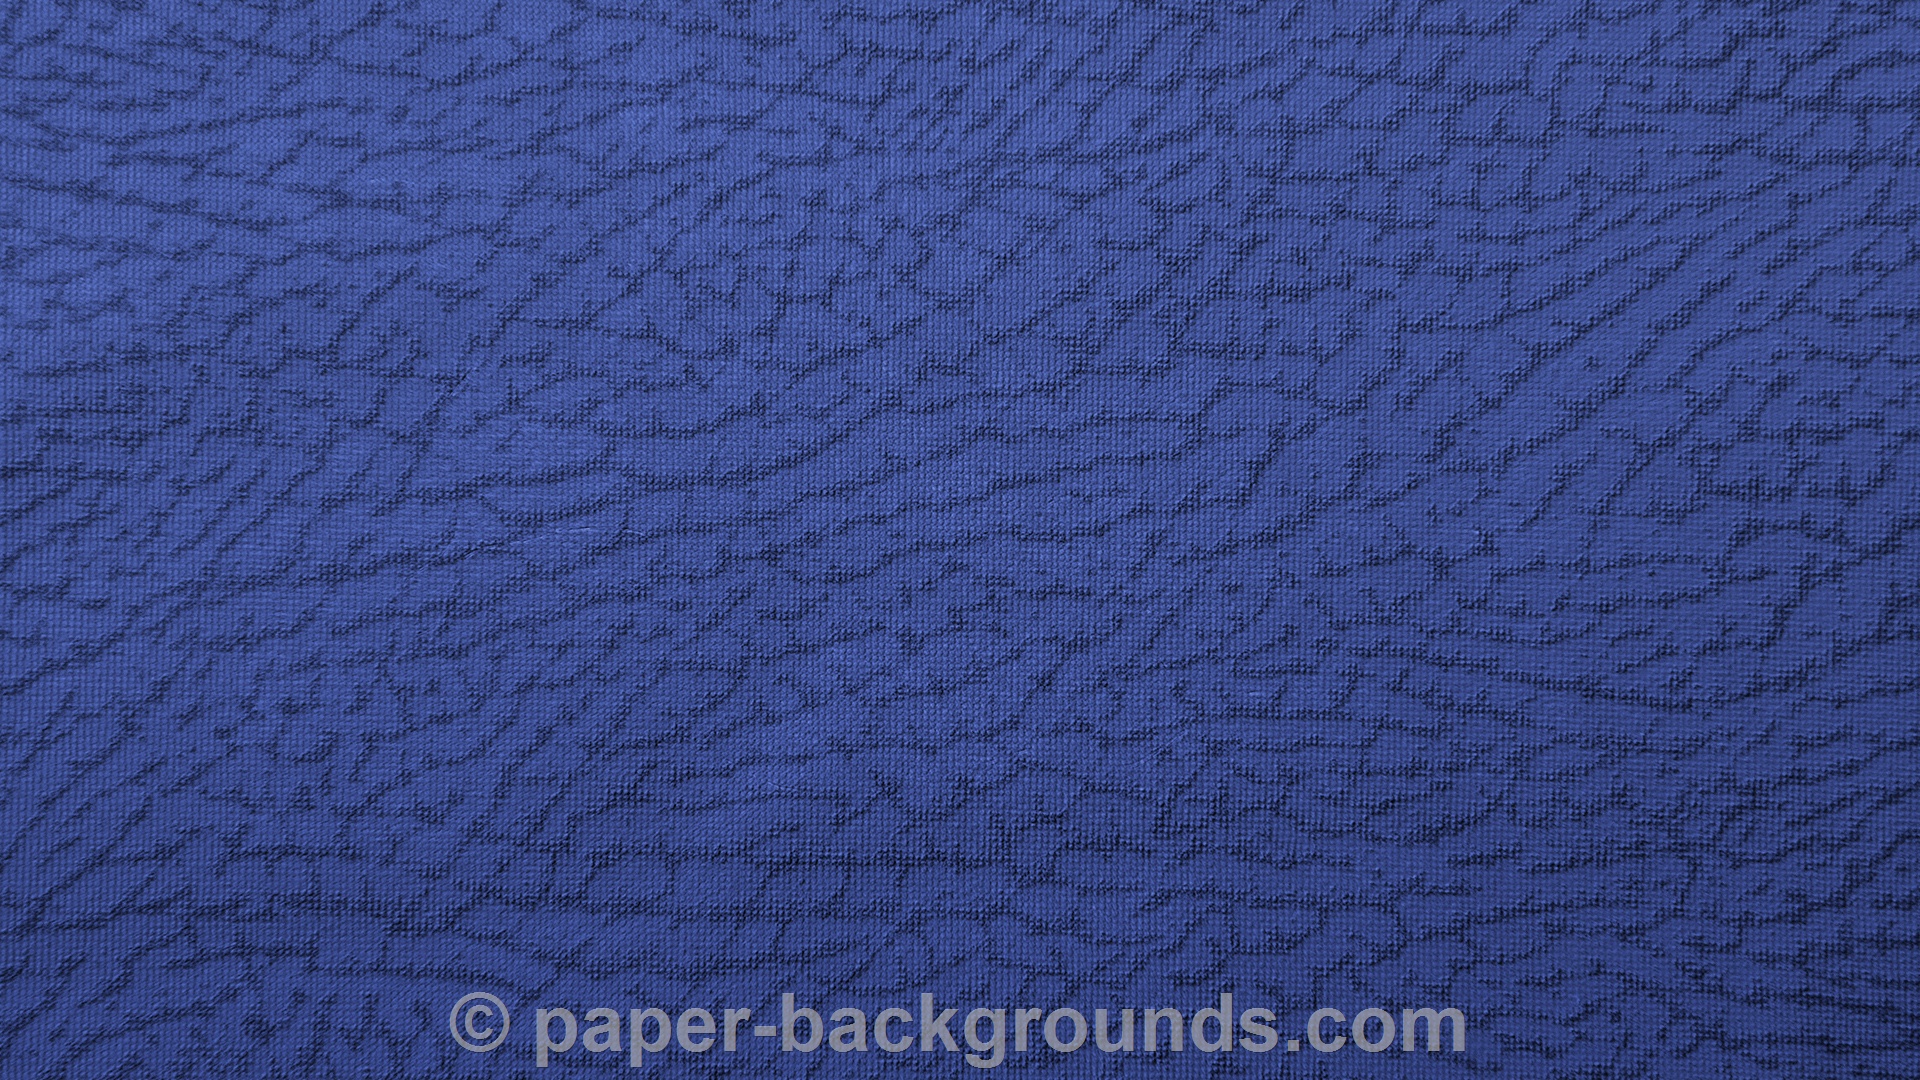 Blue Fabric Texture With Abstract Pattern HD X 1080p